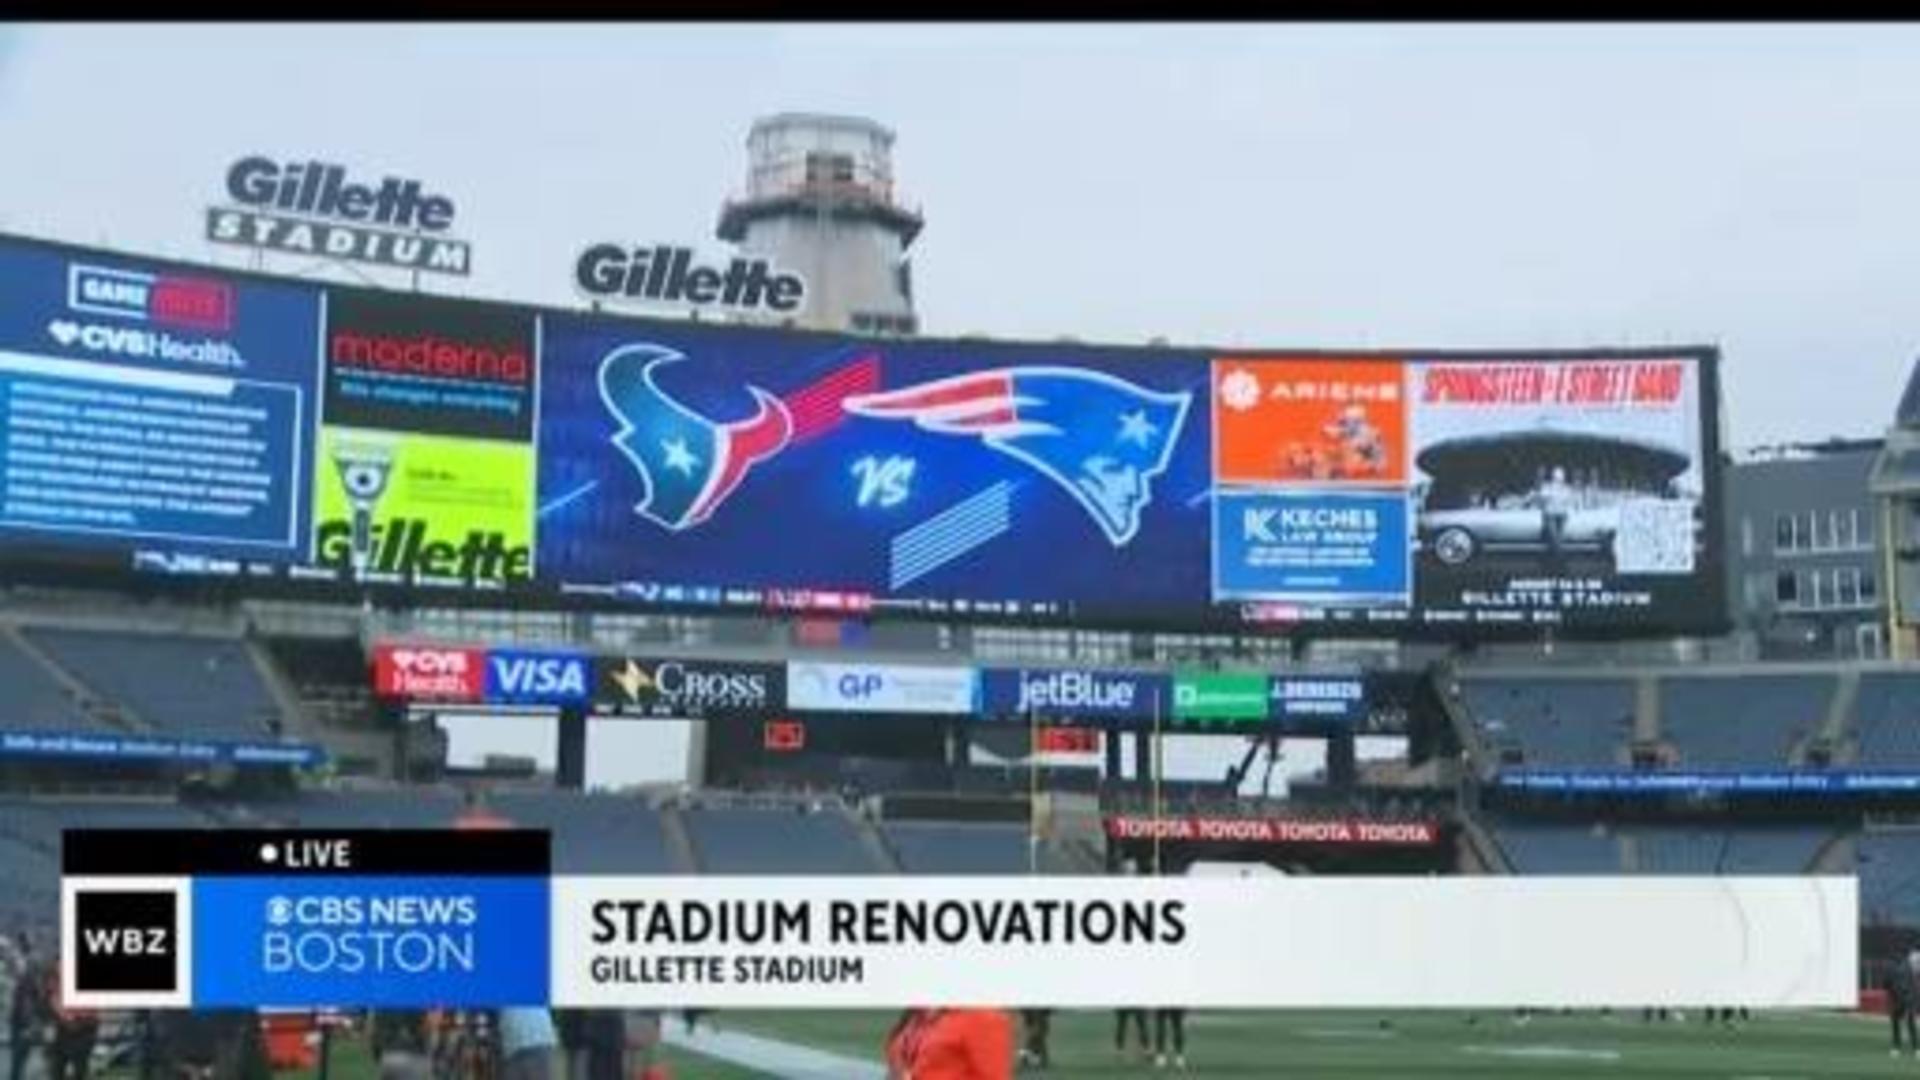 Behind the scenes: Giant video screen highlights renovations to Gillette  Stadium